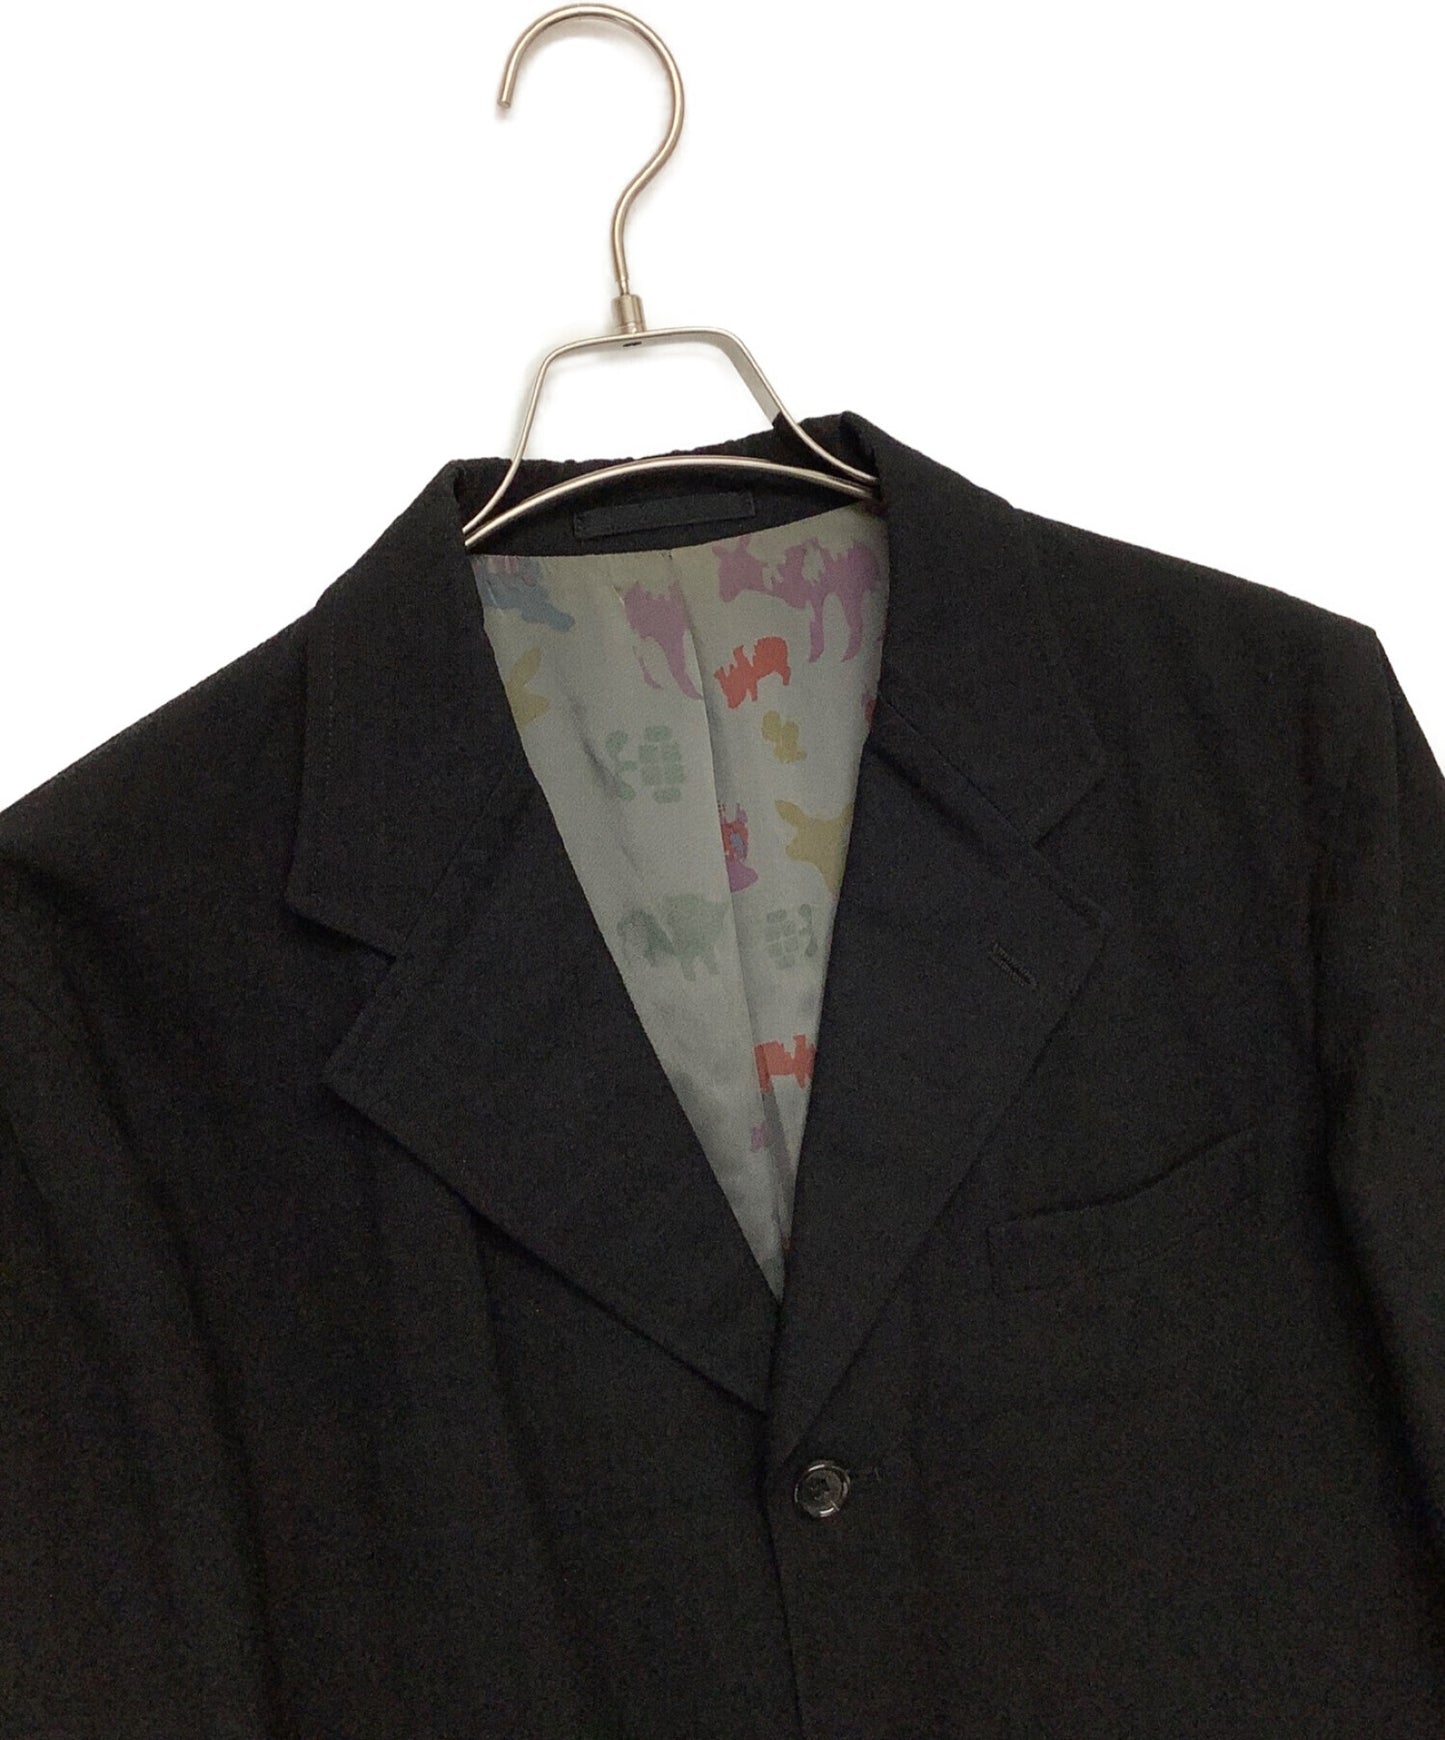 Comme des Garcons Homme Tailored Jacket with Bambi 패턴 라이닝 hk-j042